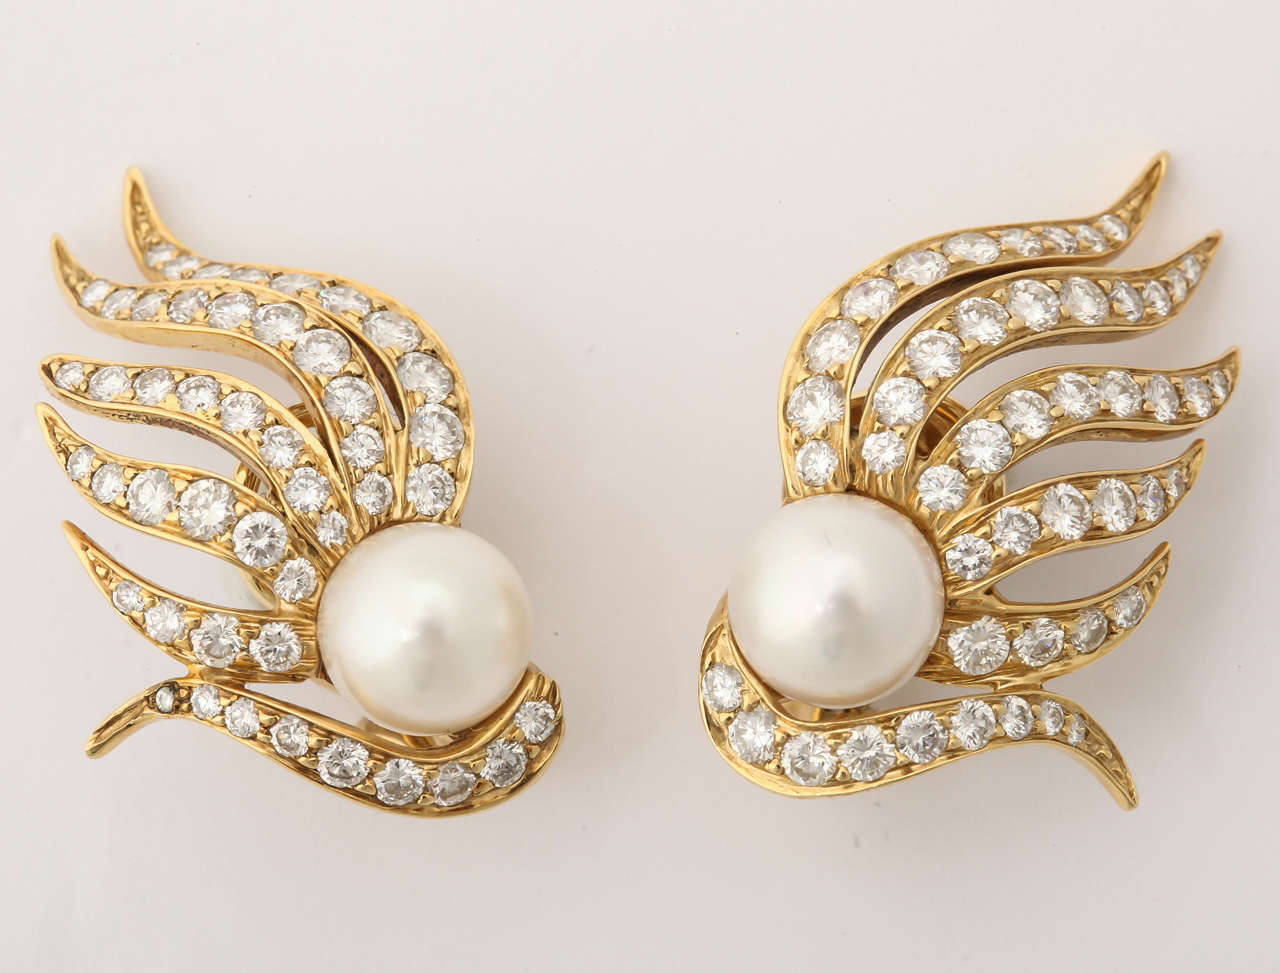 18 KT Yellow Gold Flame Design Earclips Consisting of numerous Full Cut Diamonds Weighing Approximately 4 Carats & Further Embellished by (2) 7mm High Quality Cultured Pearls in Center of Earring. 

Designed by Seaman Schepps in the 1980s